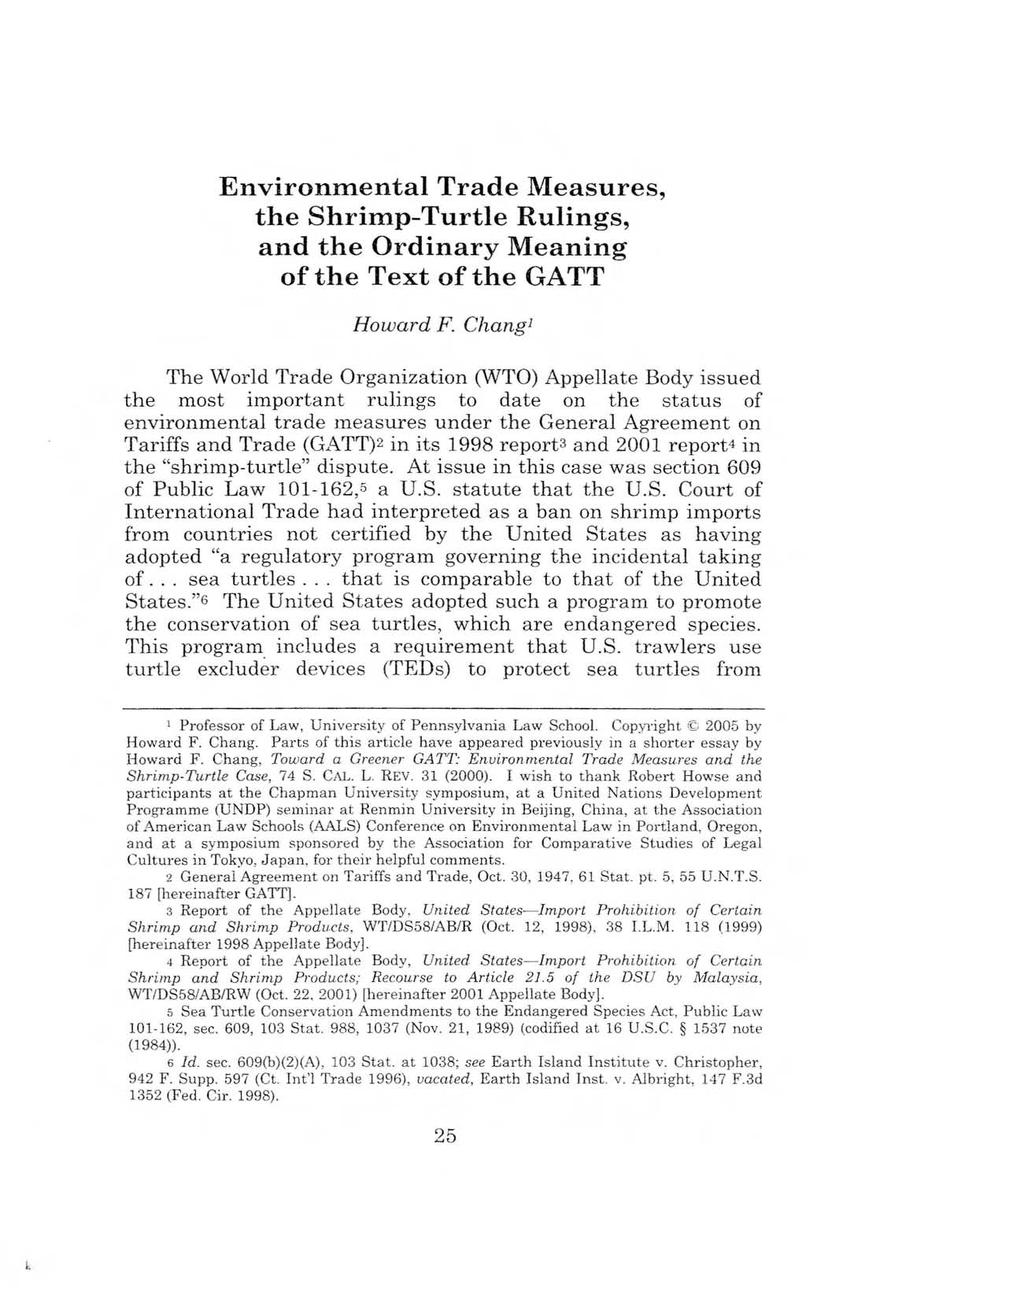 Environmental Trade Measures, the Shrimp-Turtle Rulings, and the Ordinary Meaning ofthe Text ofthe GATT Howard F.